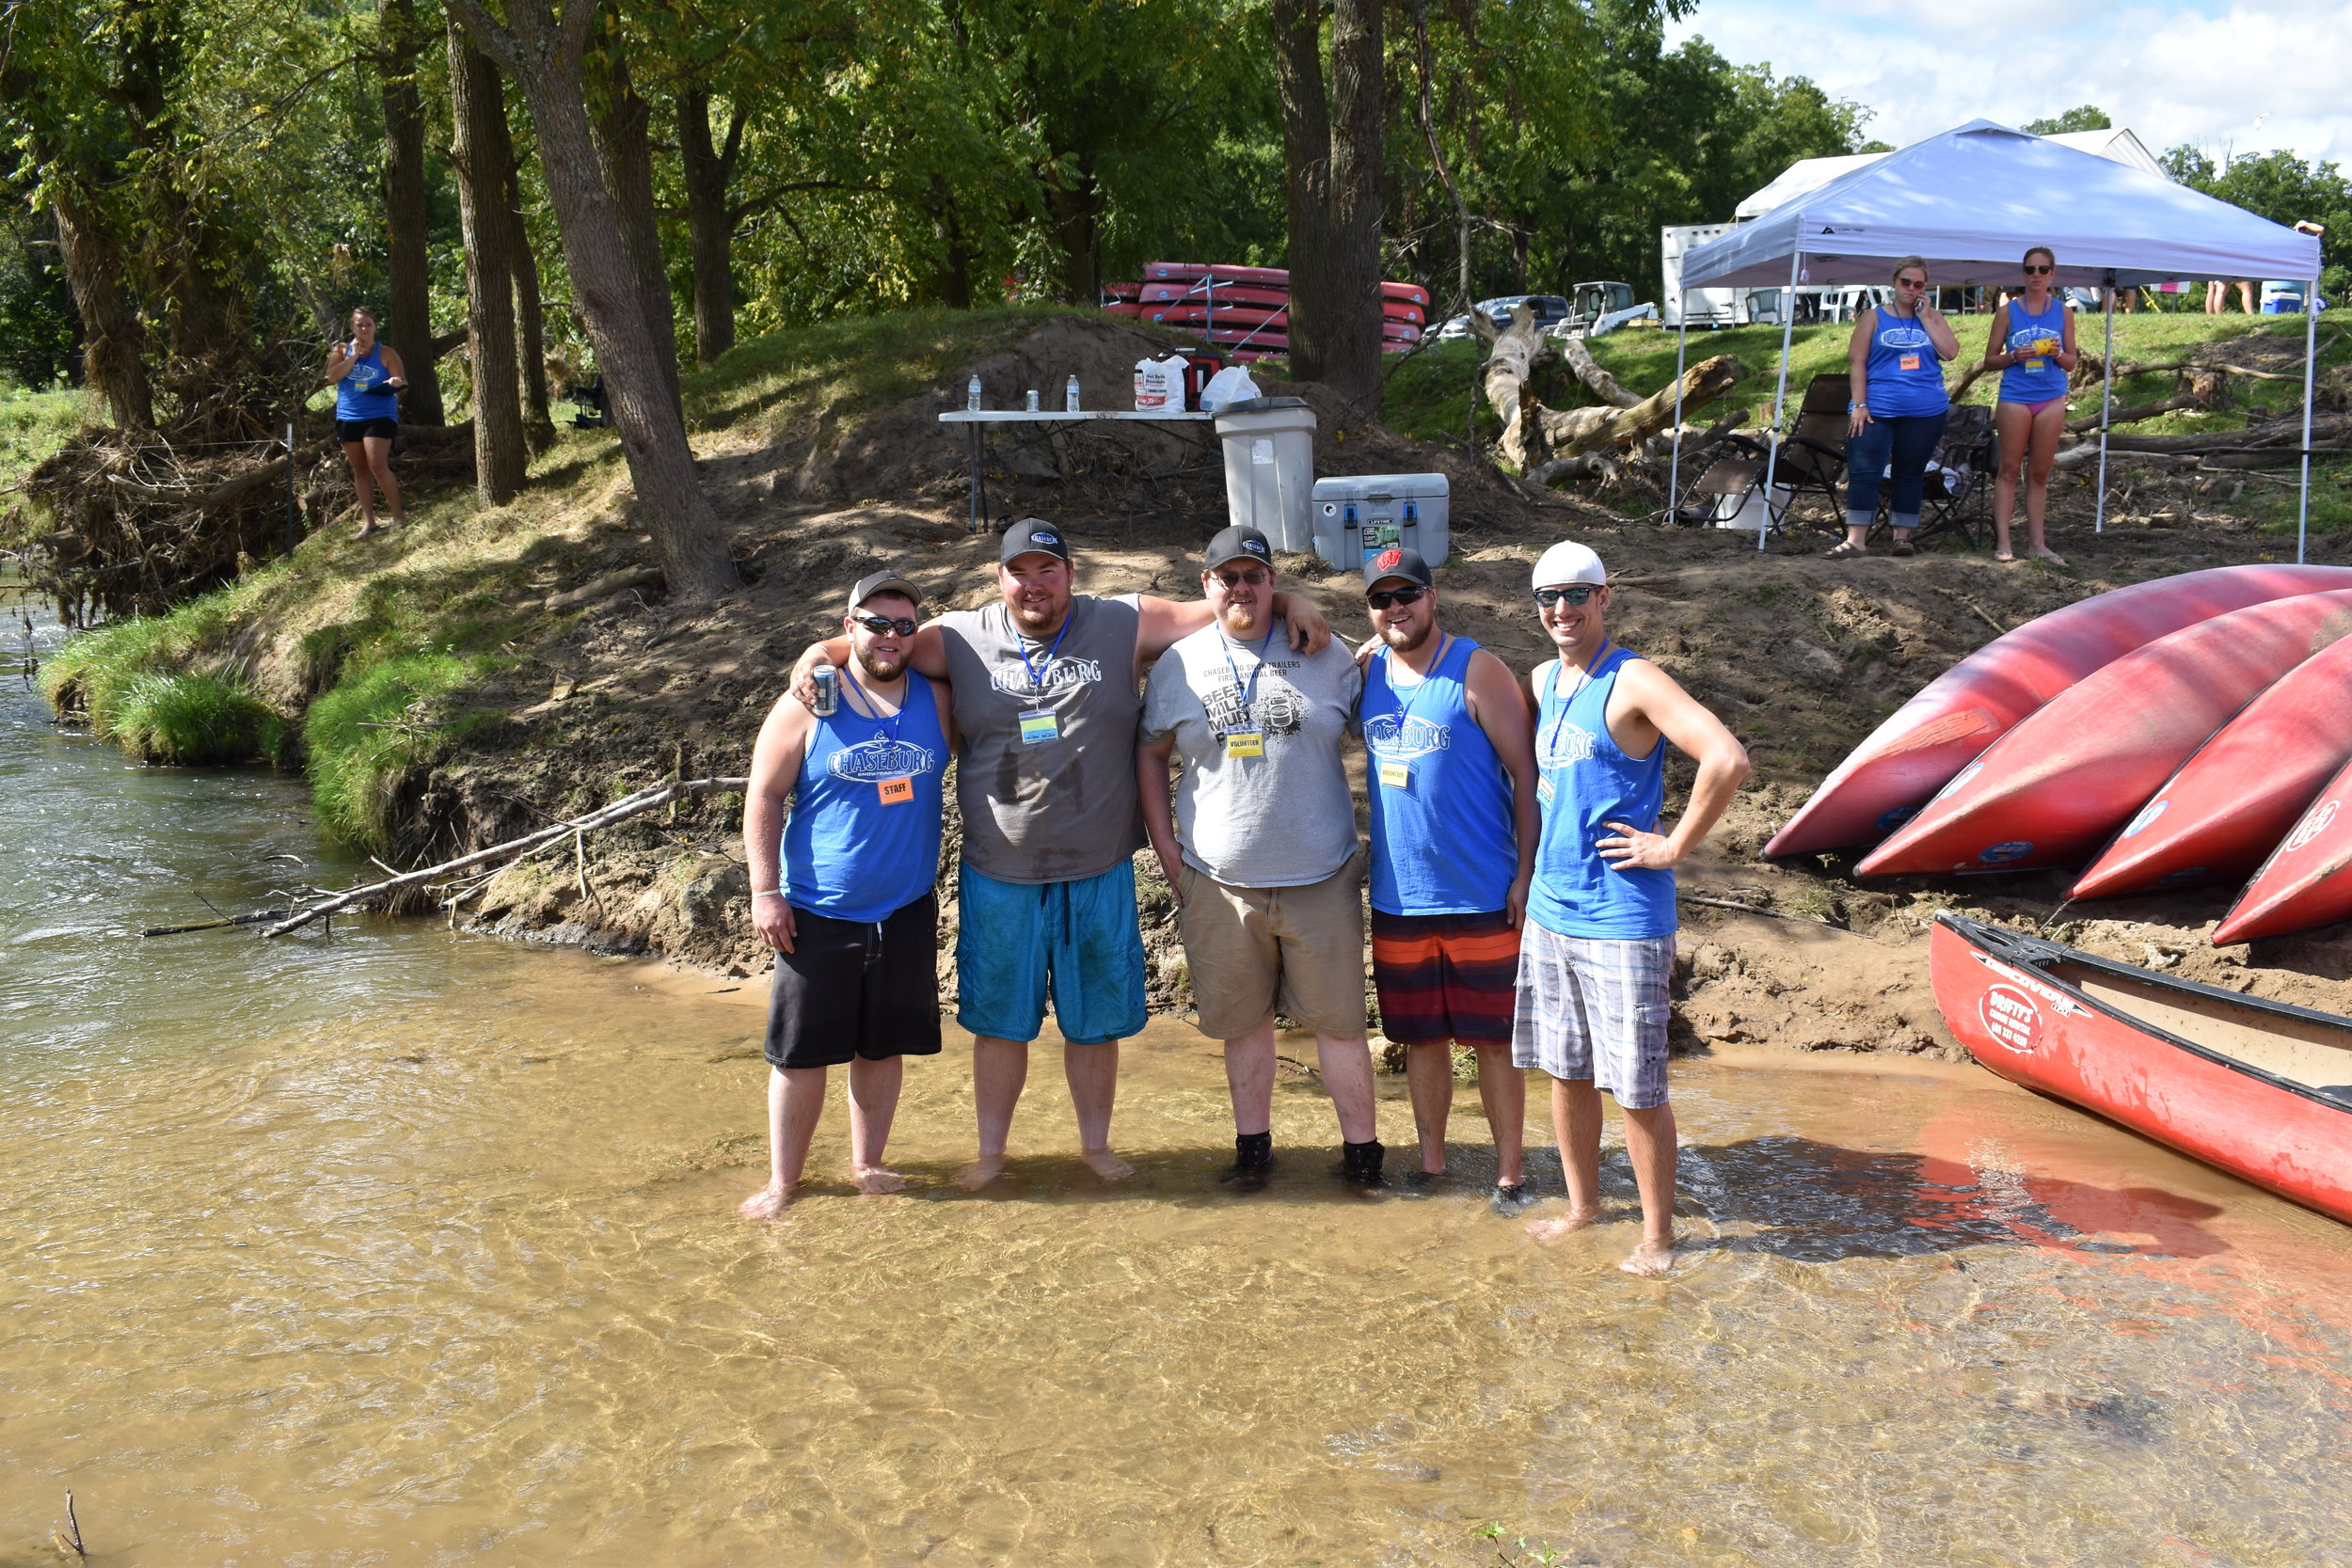  L to R- Helping launch canoers were Chaseburg Snow Trailers Mason Ostrem, Justin Helgeson, Joe Garbers, Adam Olson and Jeff Richards 